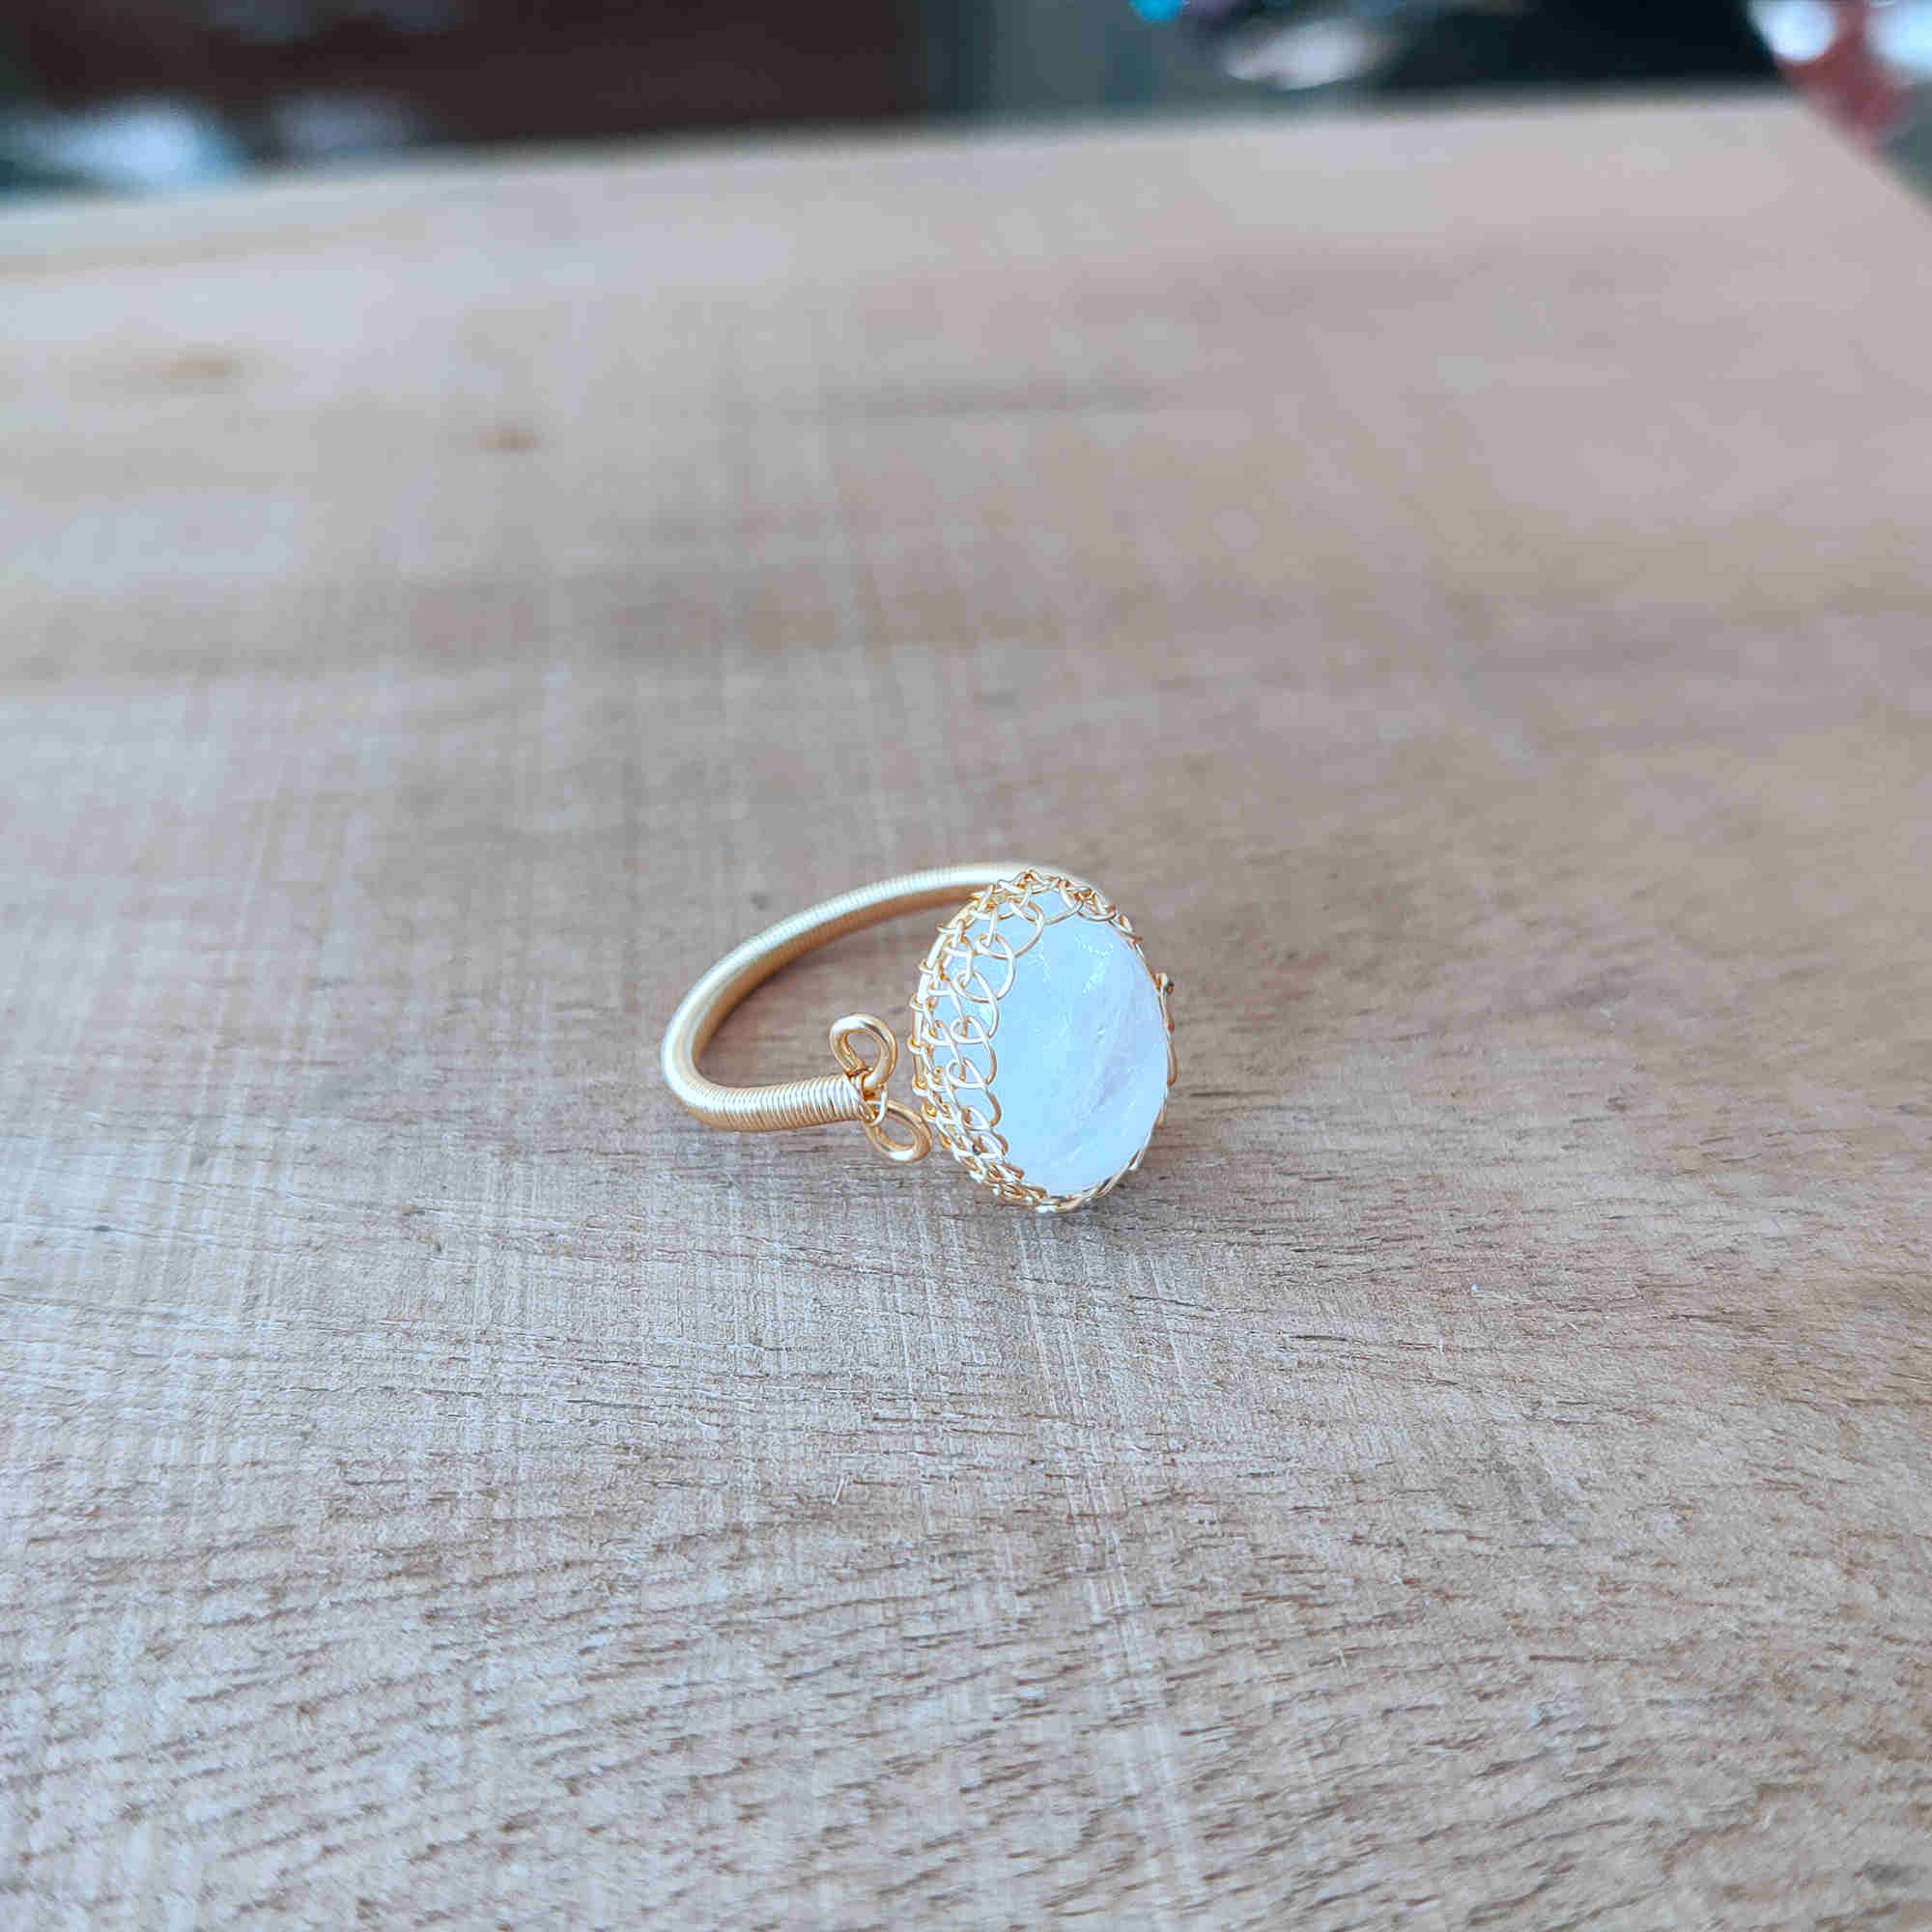 Gold Wire Wrap Moonstone Ring, Adjustable, Healing Gemstone Ring, Handmade Jewelry HUS228 mother's ring, mother's day gift, gift for her, for women